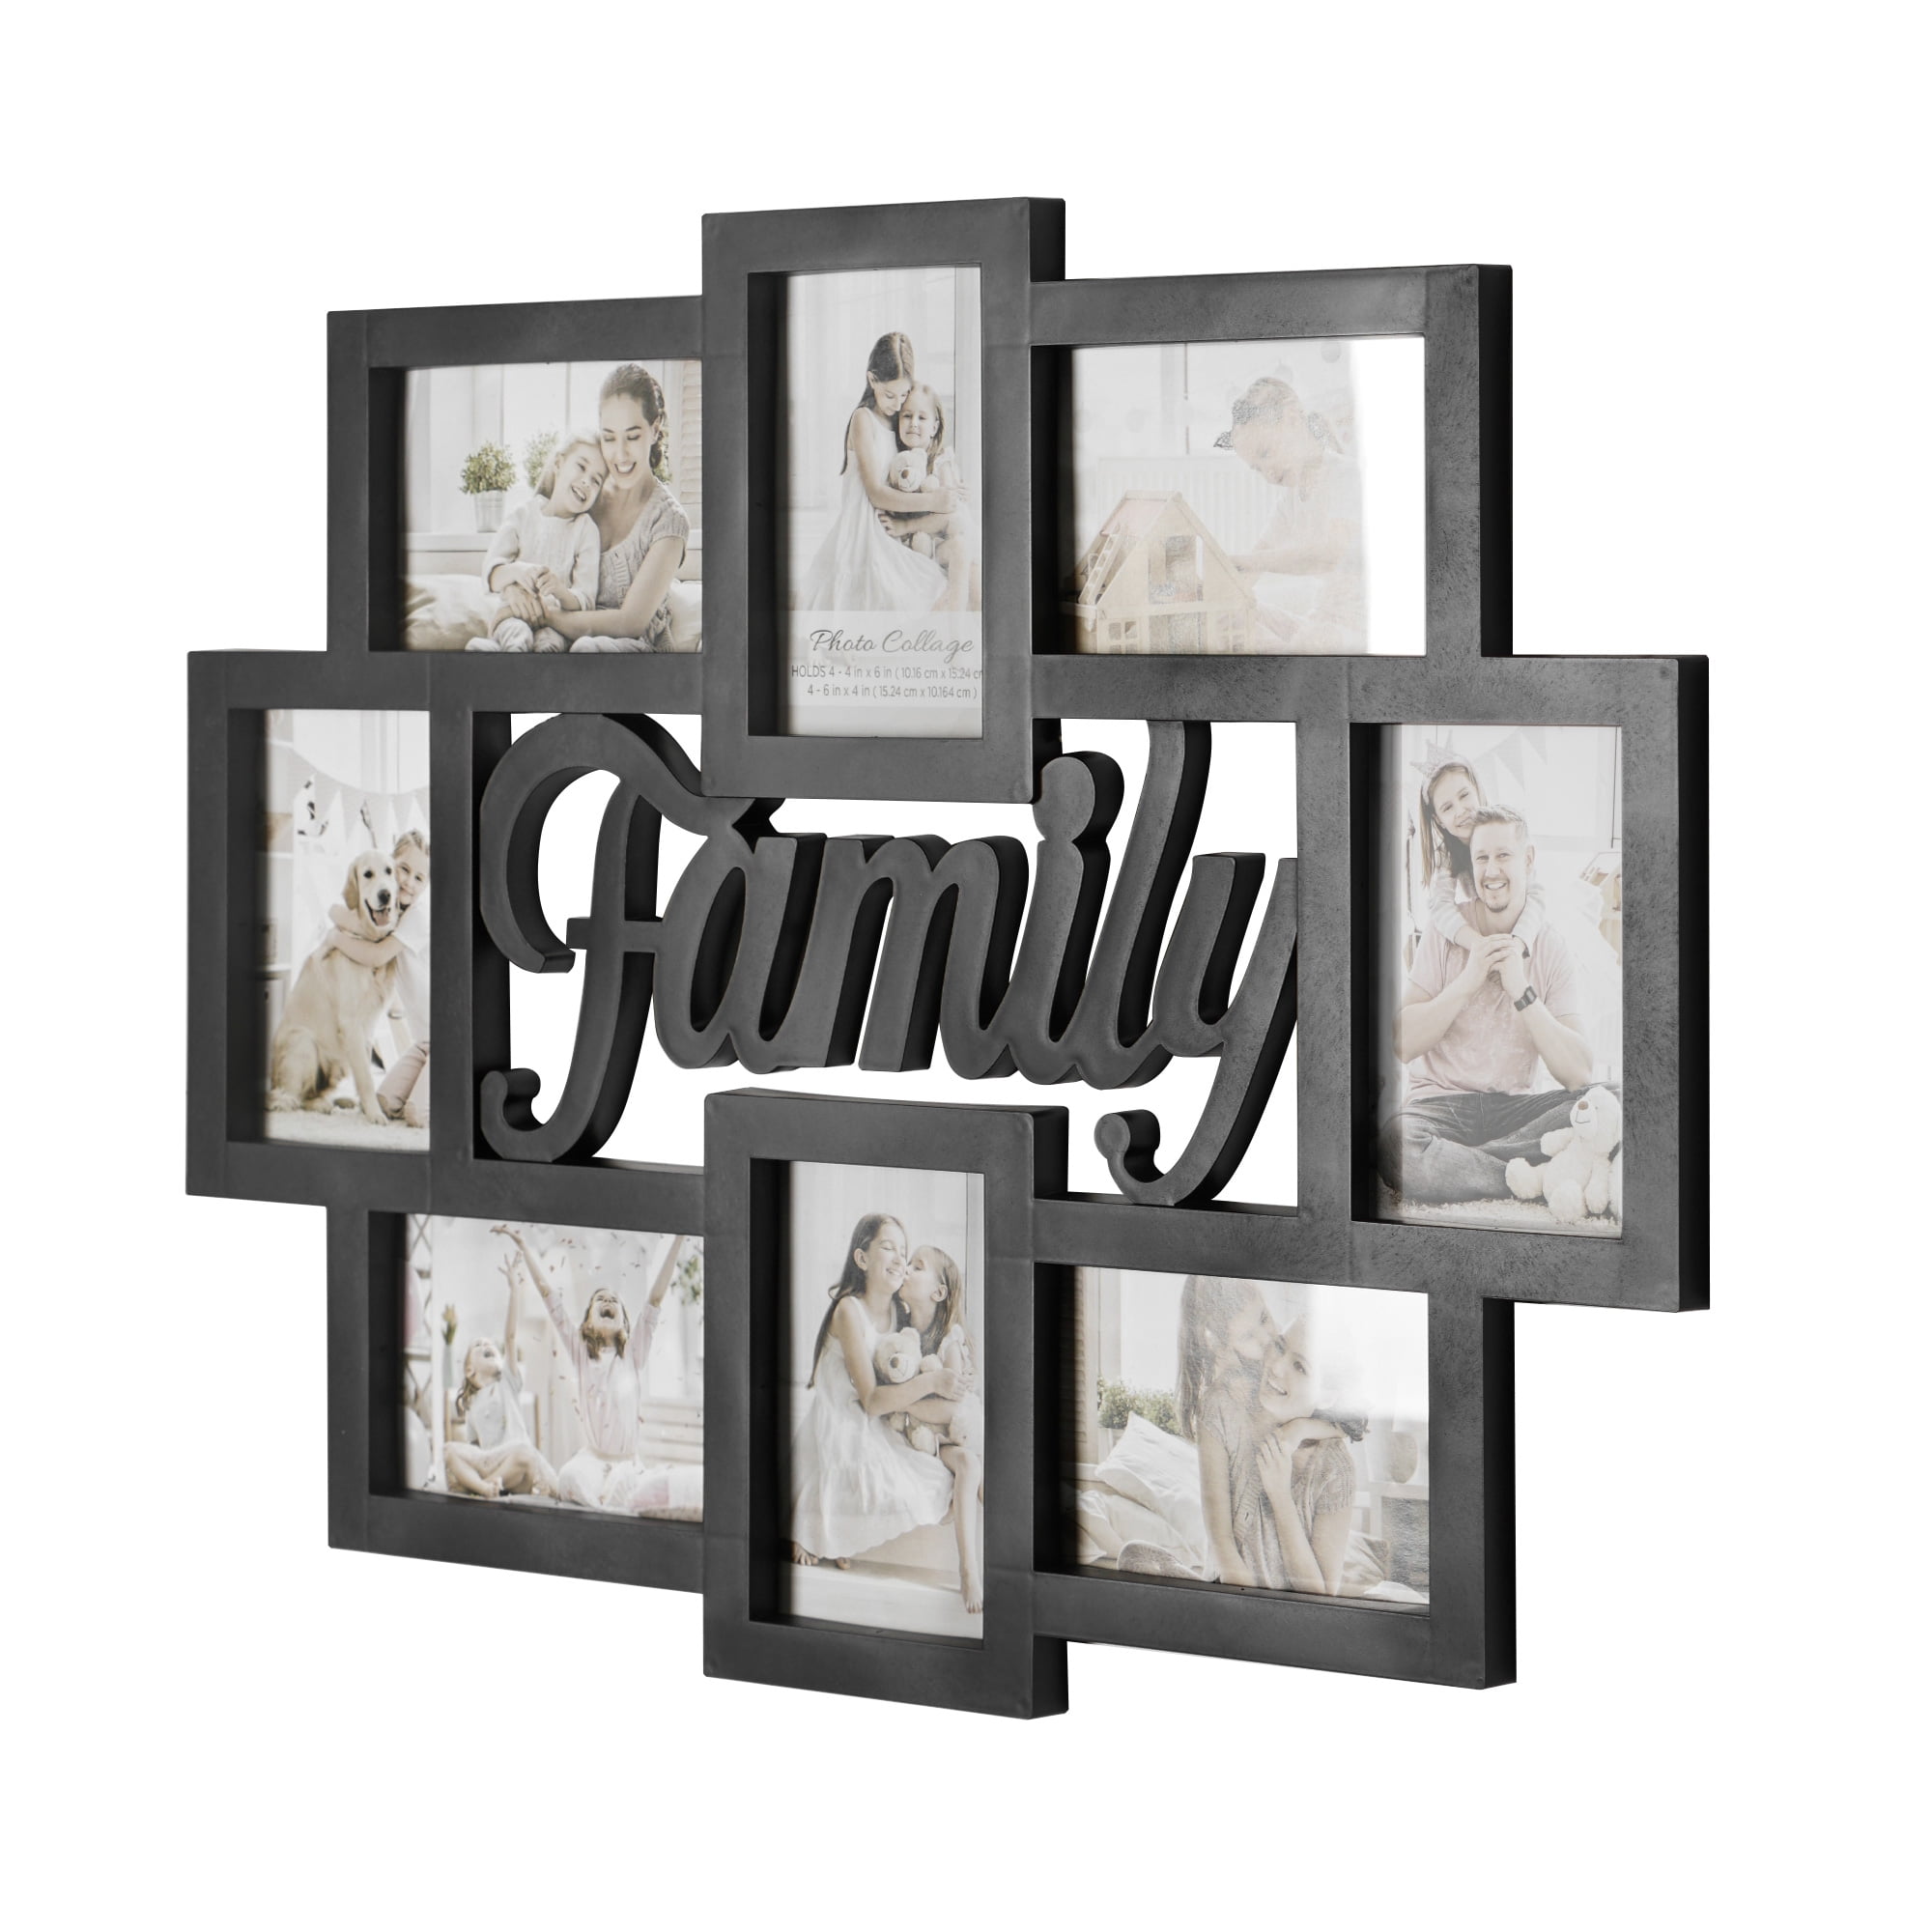 7 Pack - 20 x 15 cm Black Picture Frame with Glass Fr BELLE VOUS Photo Frame 